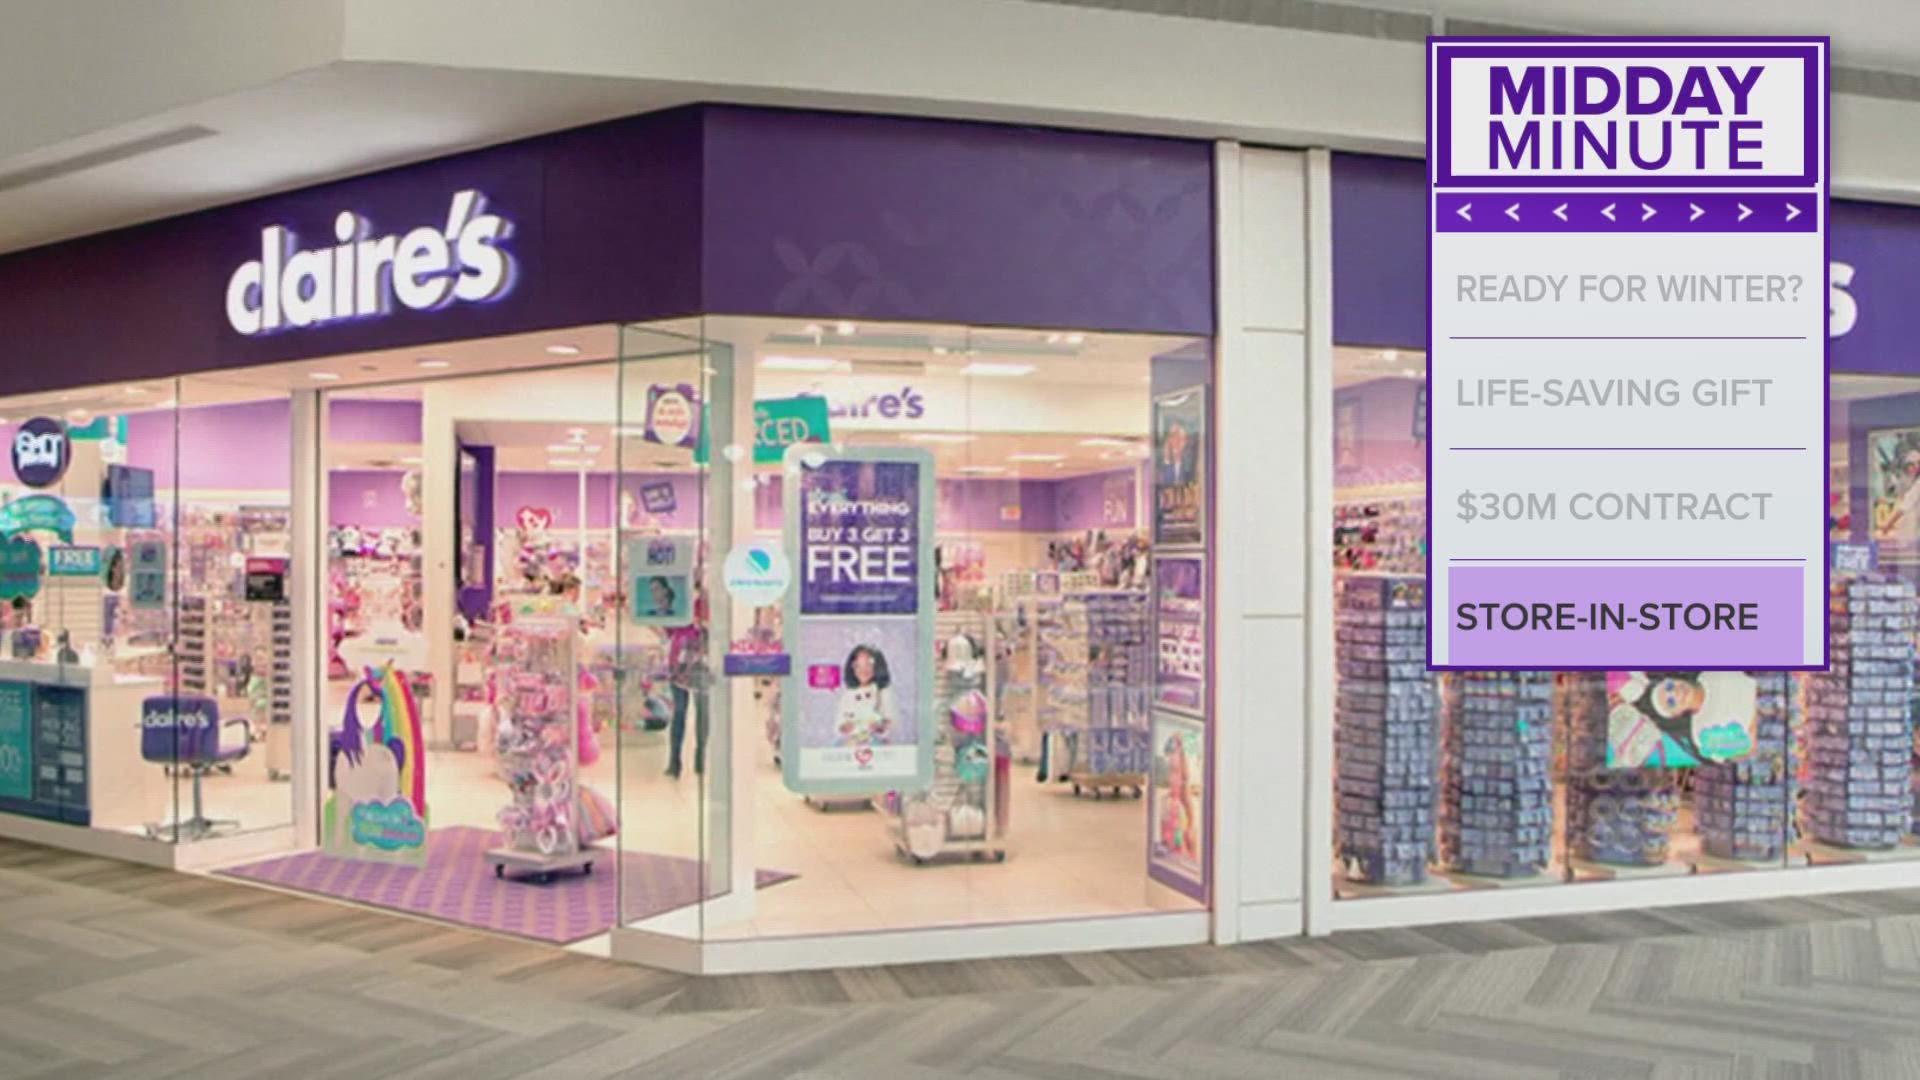 The company recently rolled out "Toy R Us" areas in stores nationwide.